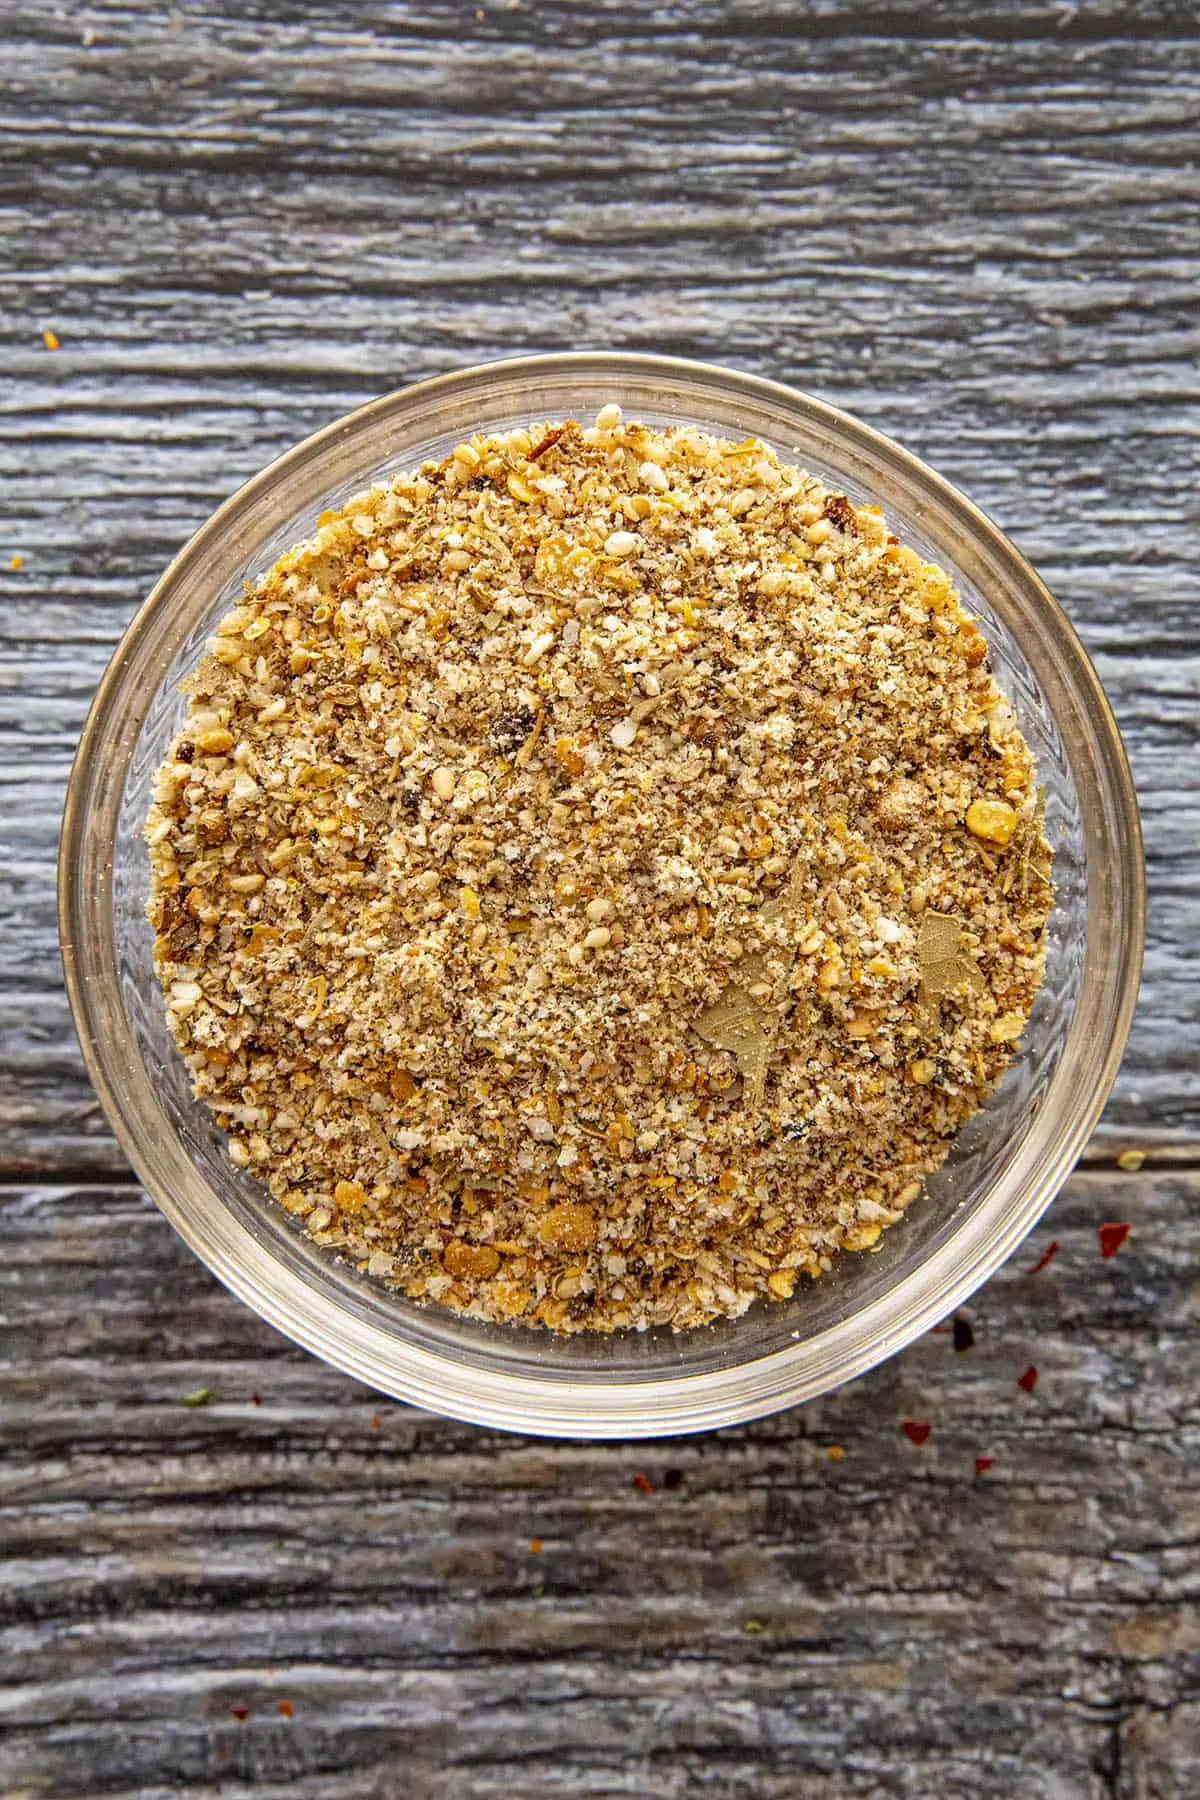 Ground spices and seeds in a bowl